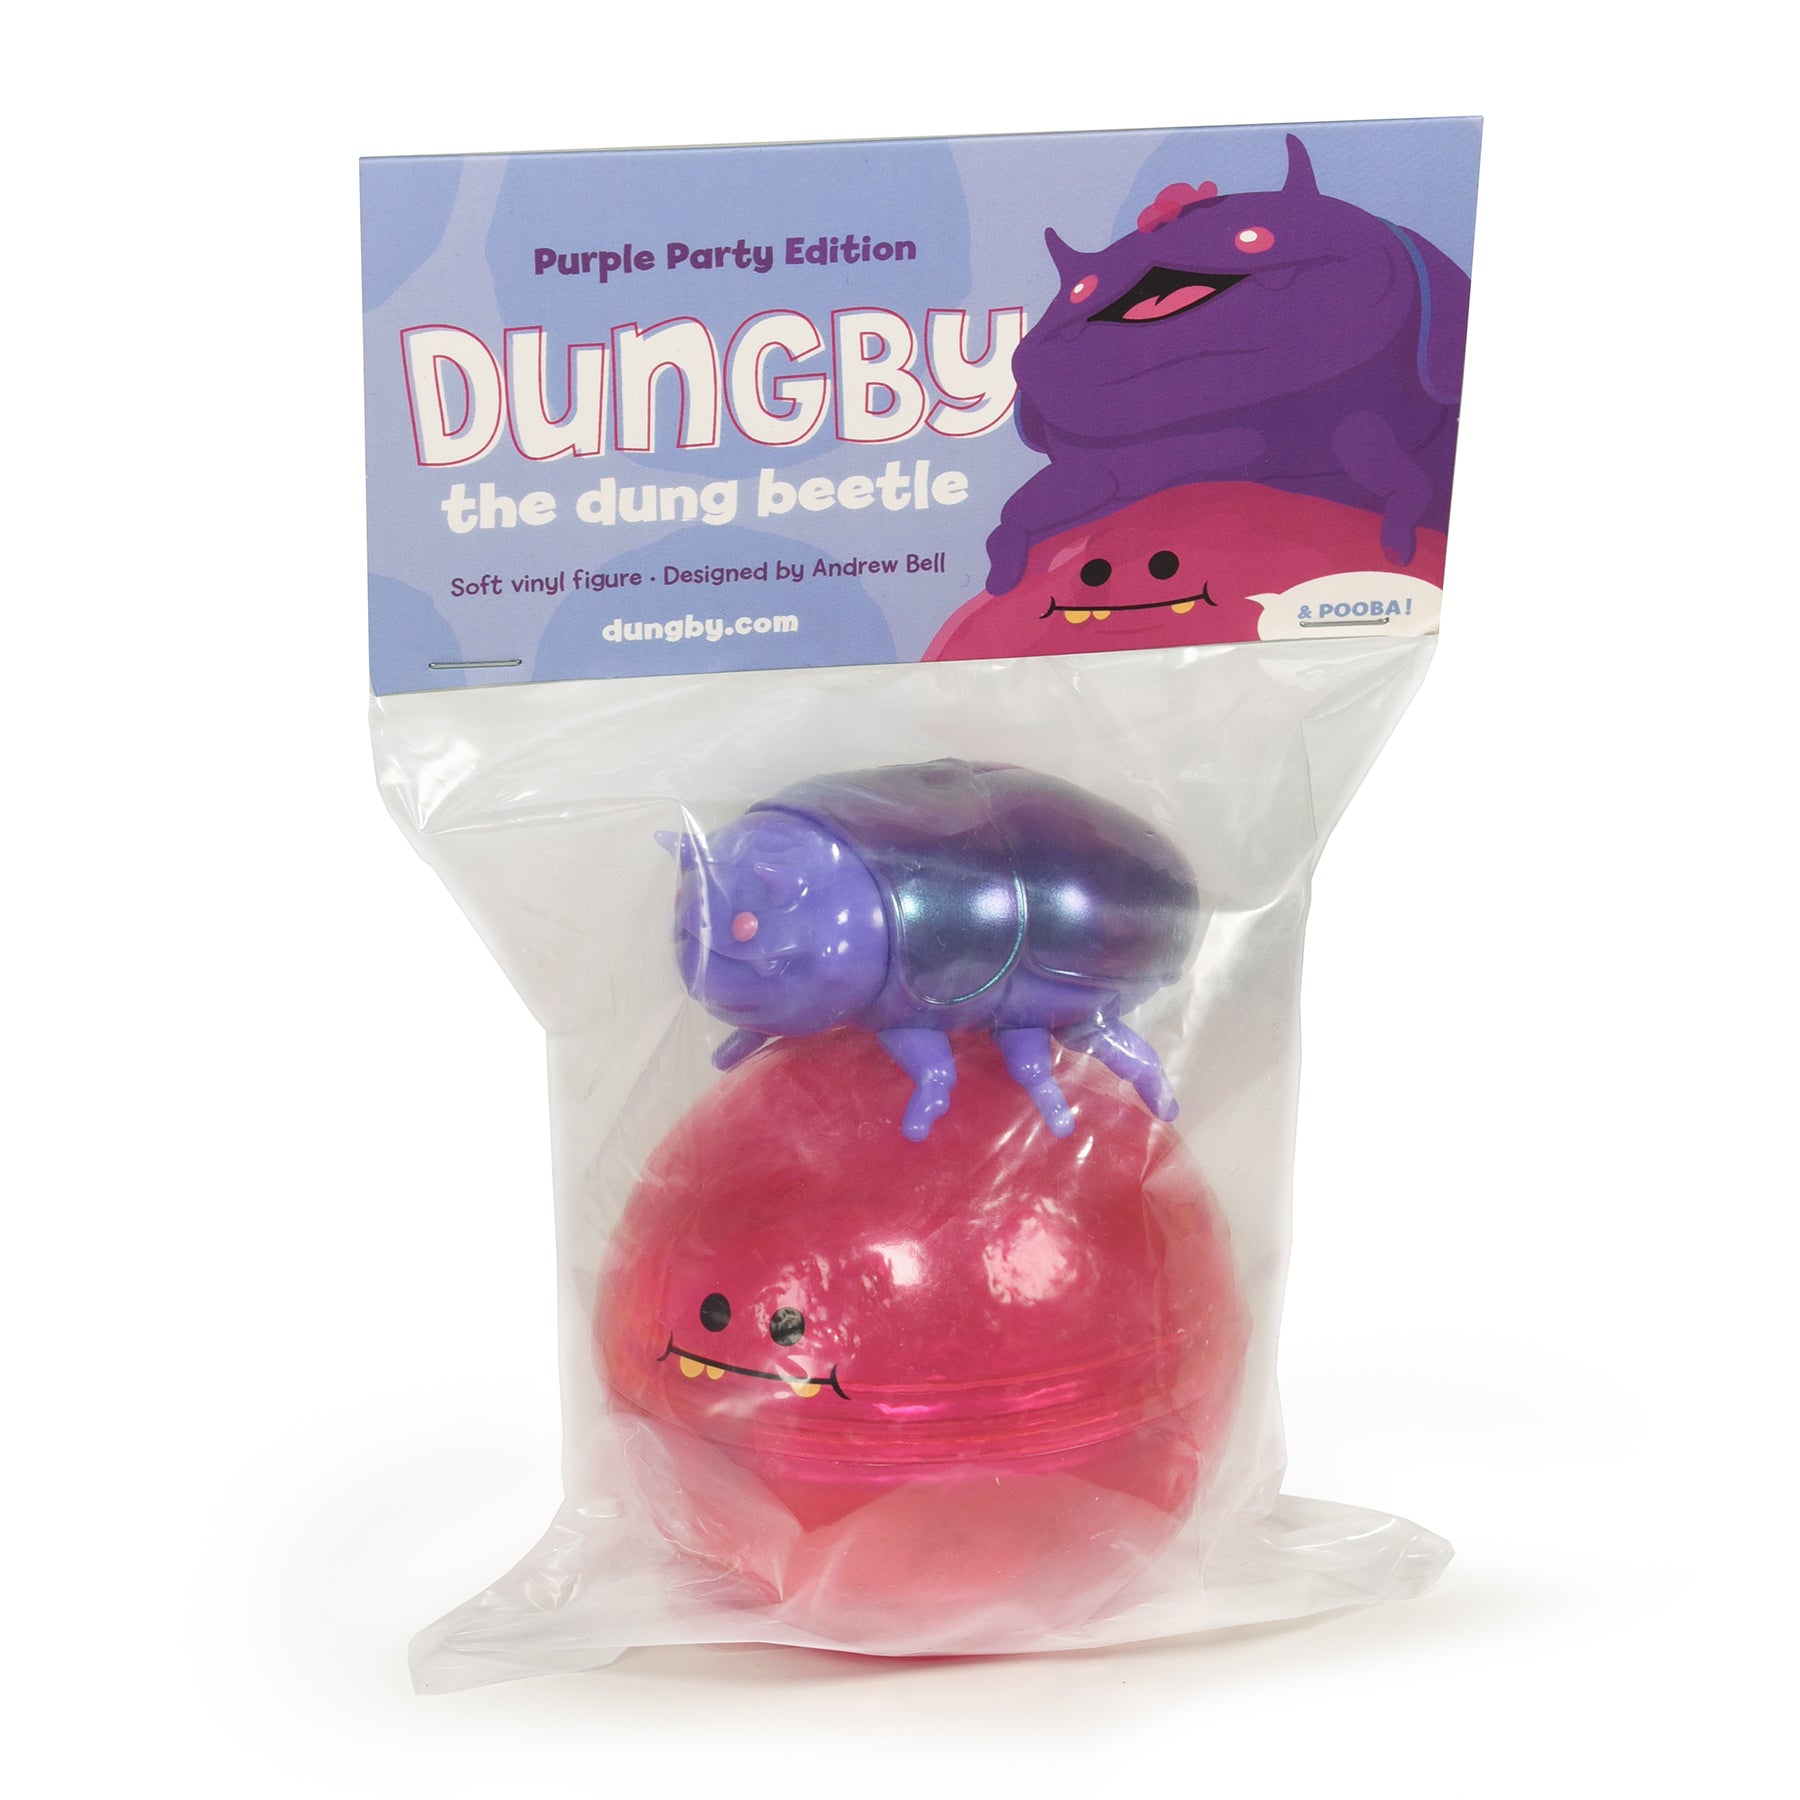 Dungby & Pooba “Purple Party” edition sofubi by Andrew Bell